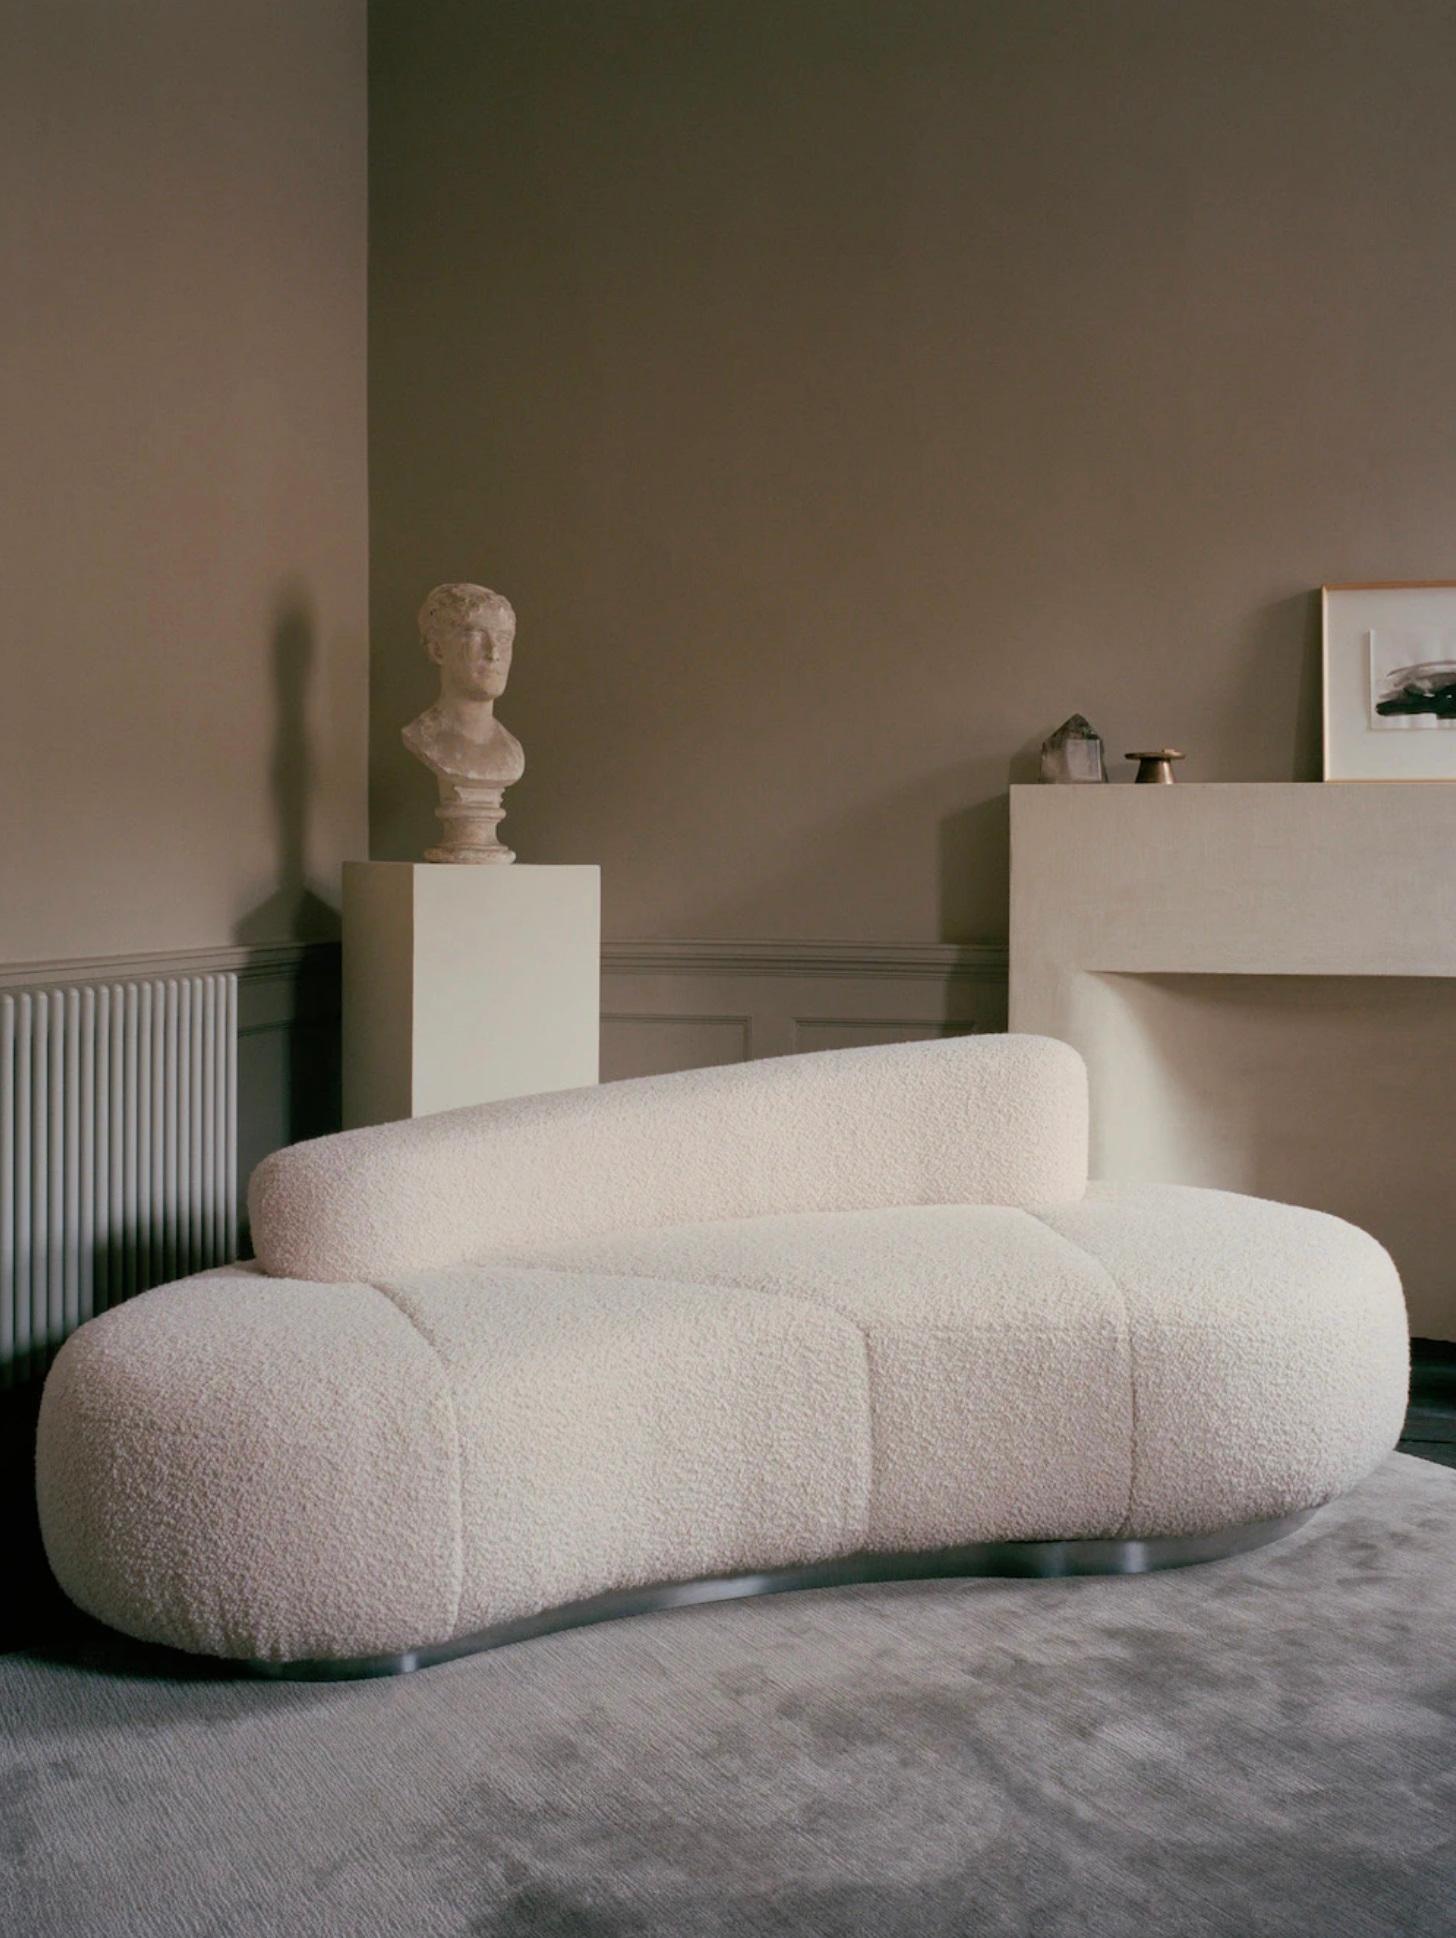 Cloud sofa by Fred Rigby Studio.
Dimensions: L 216 x W 140 x H 67 cm.
Materials: boucle weave fabric.

The Cloud Sofa, from the Francis x Fred Rigby furniture collection, has been designed to recreate the imagined softness and comfort of sitting